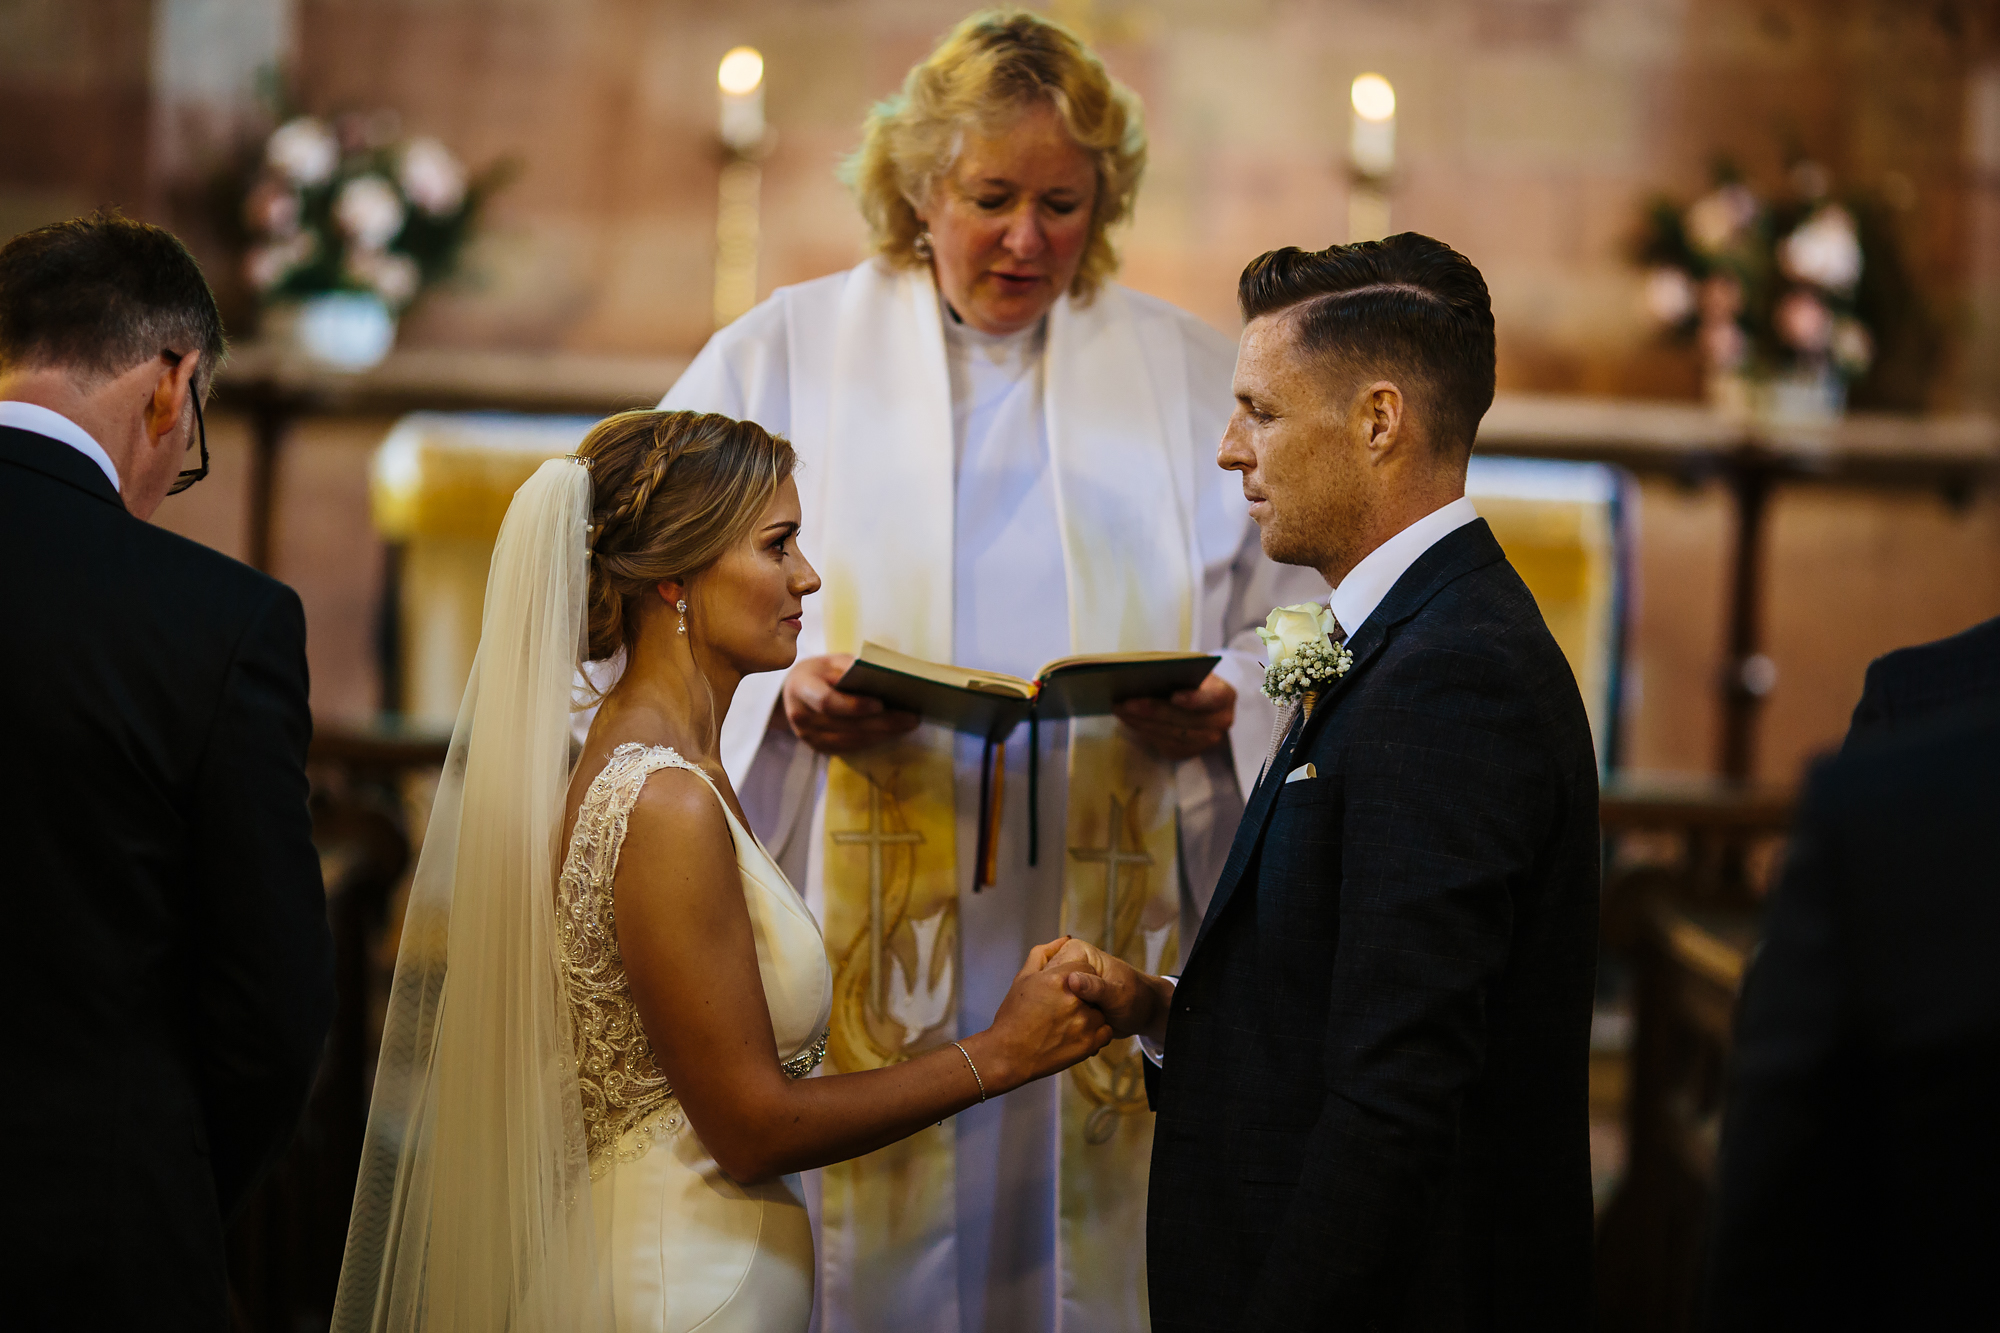 Bride and groom exchange vows in Shropshire wedding